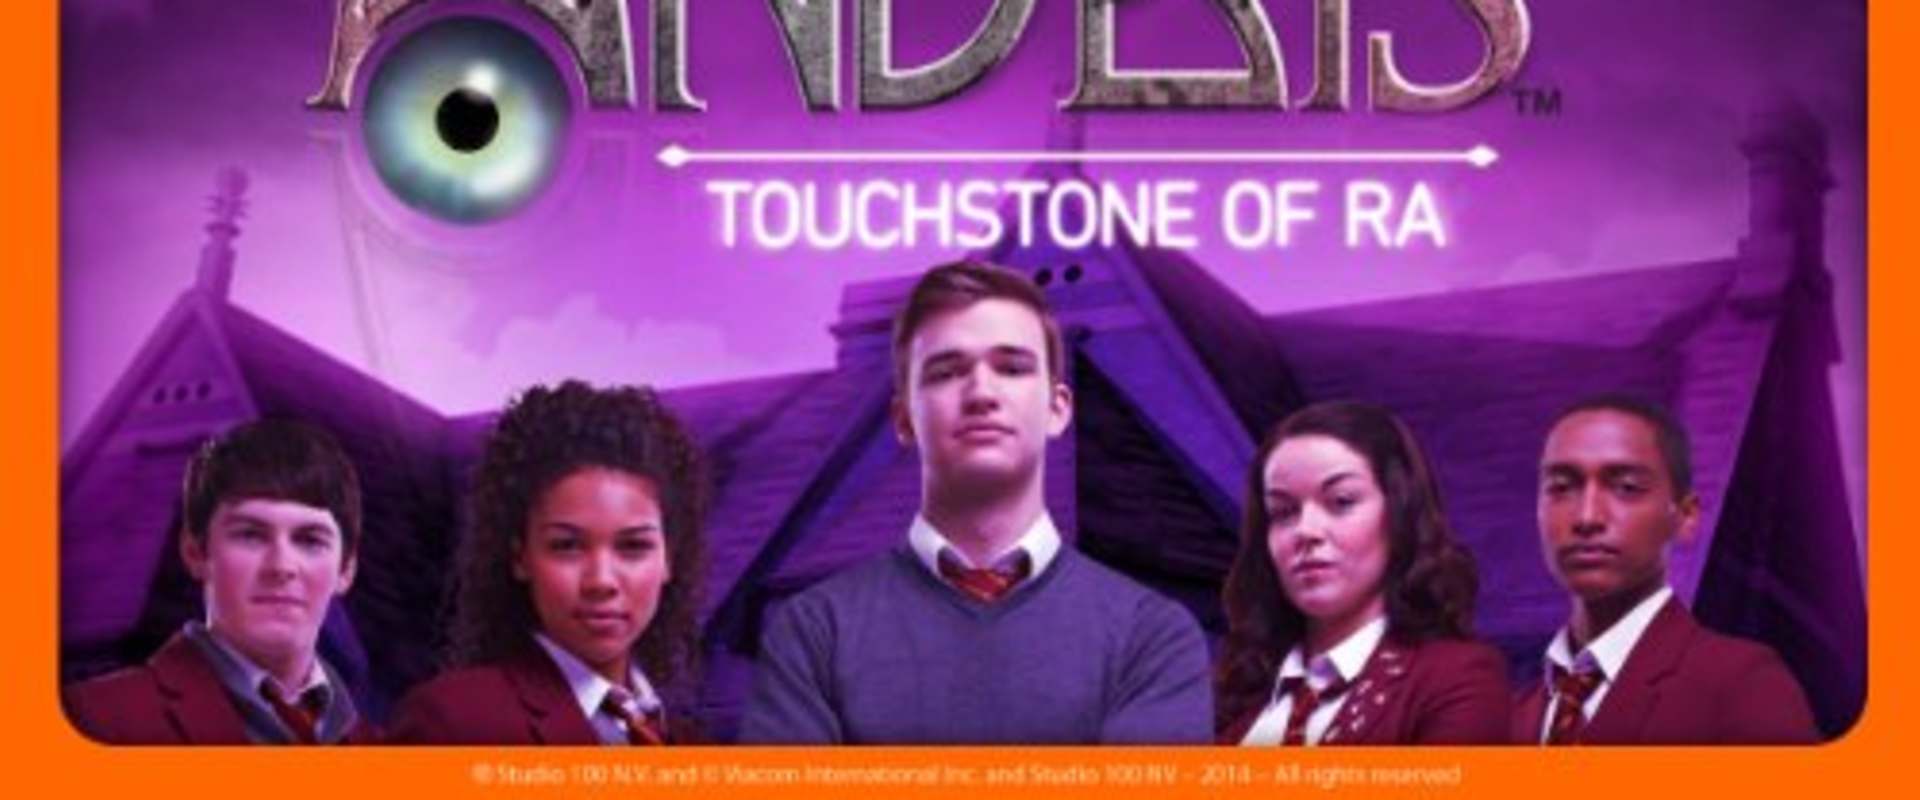 House of Anubis: The Touchstone of Ra background 1